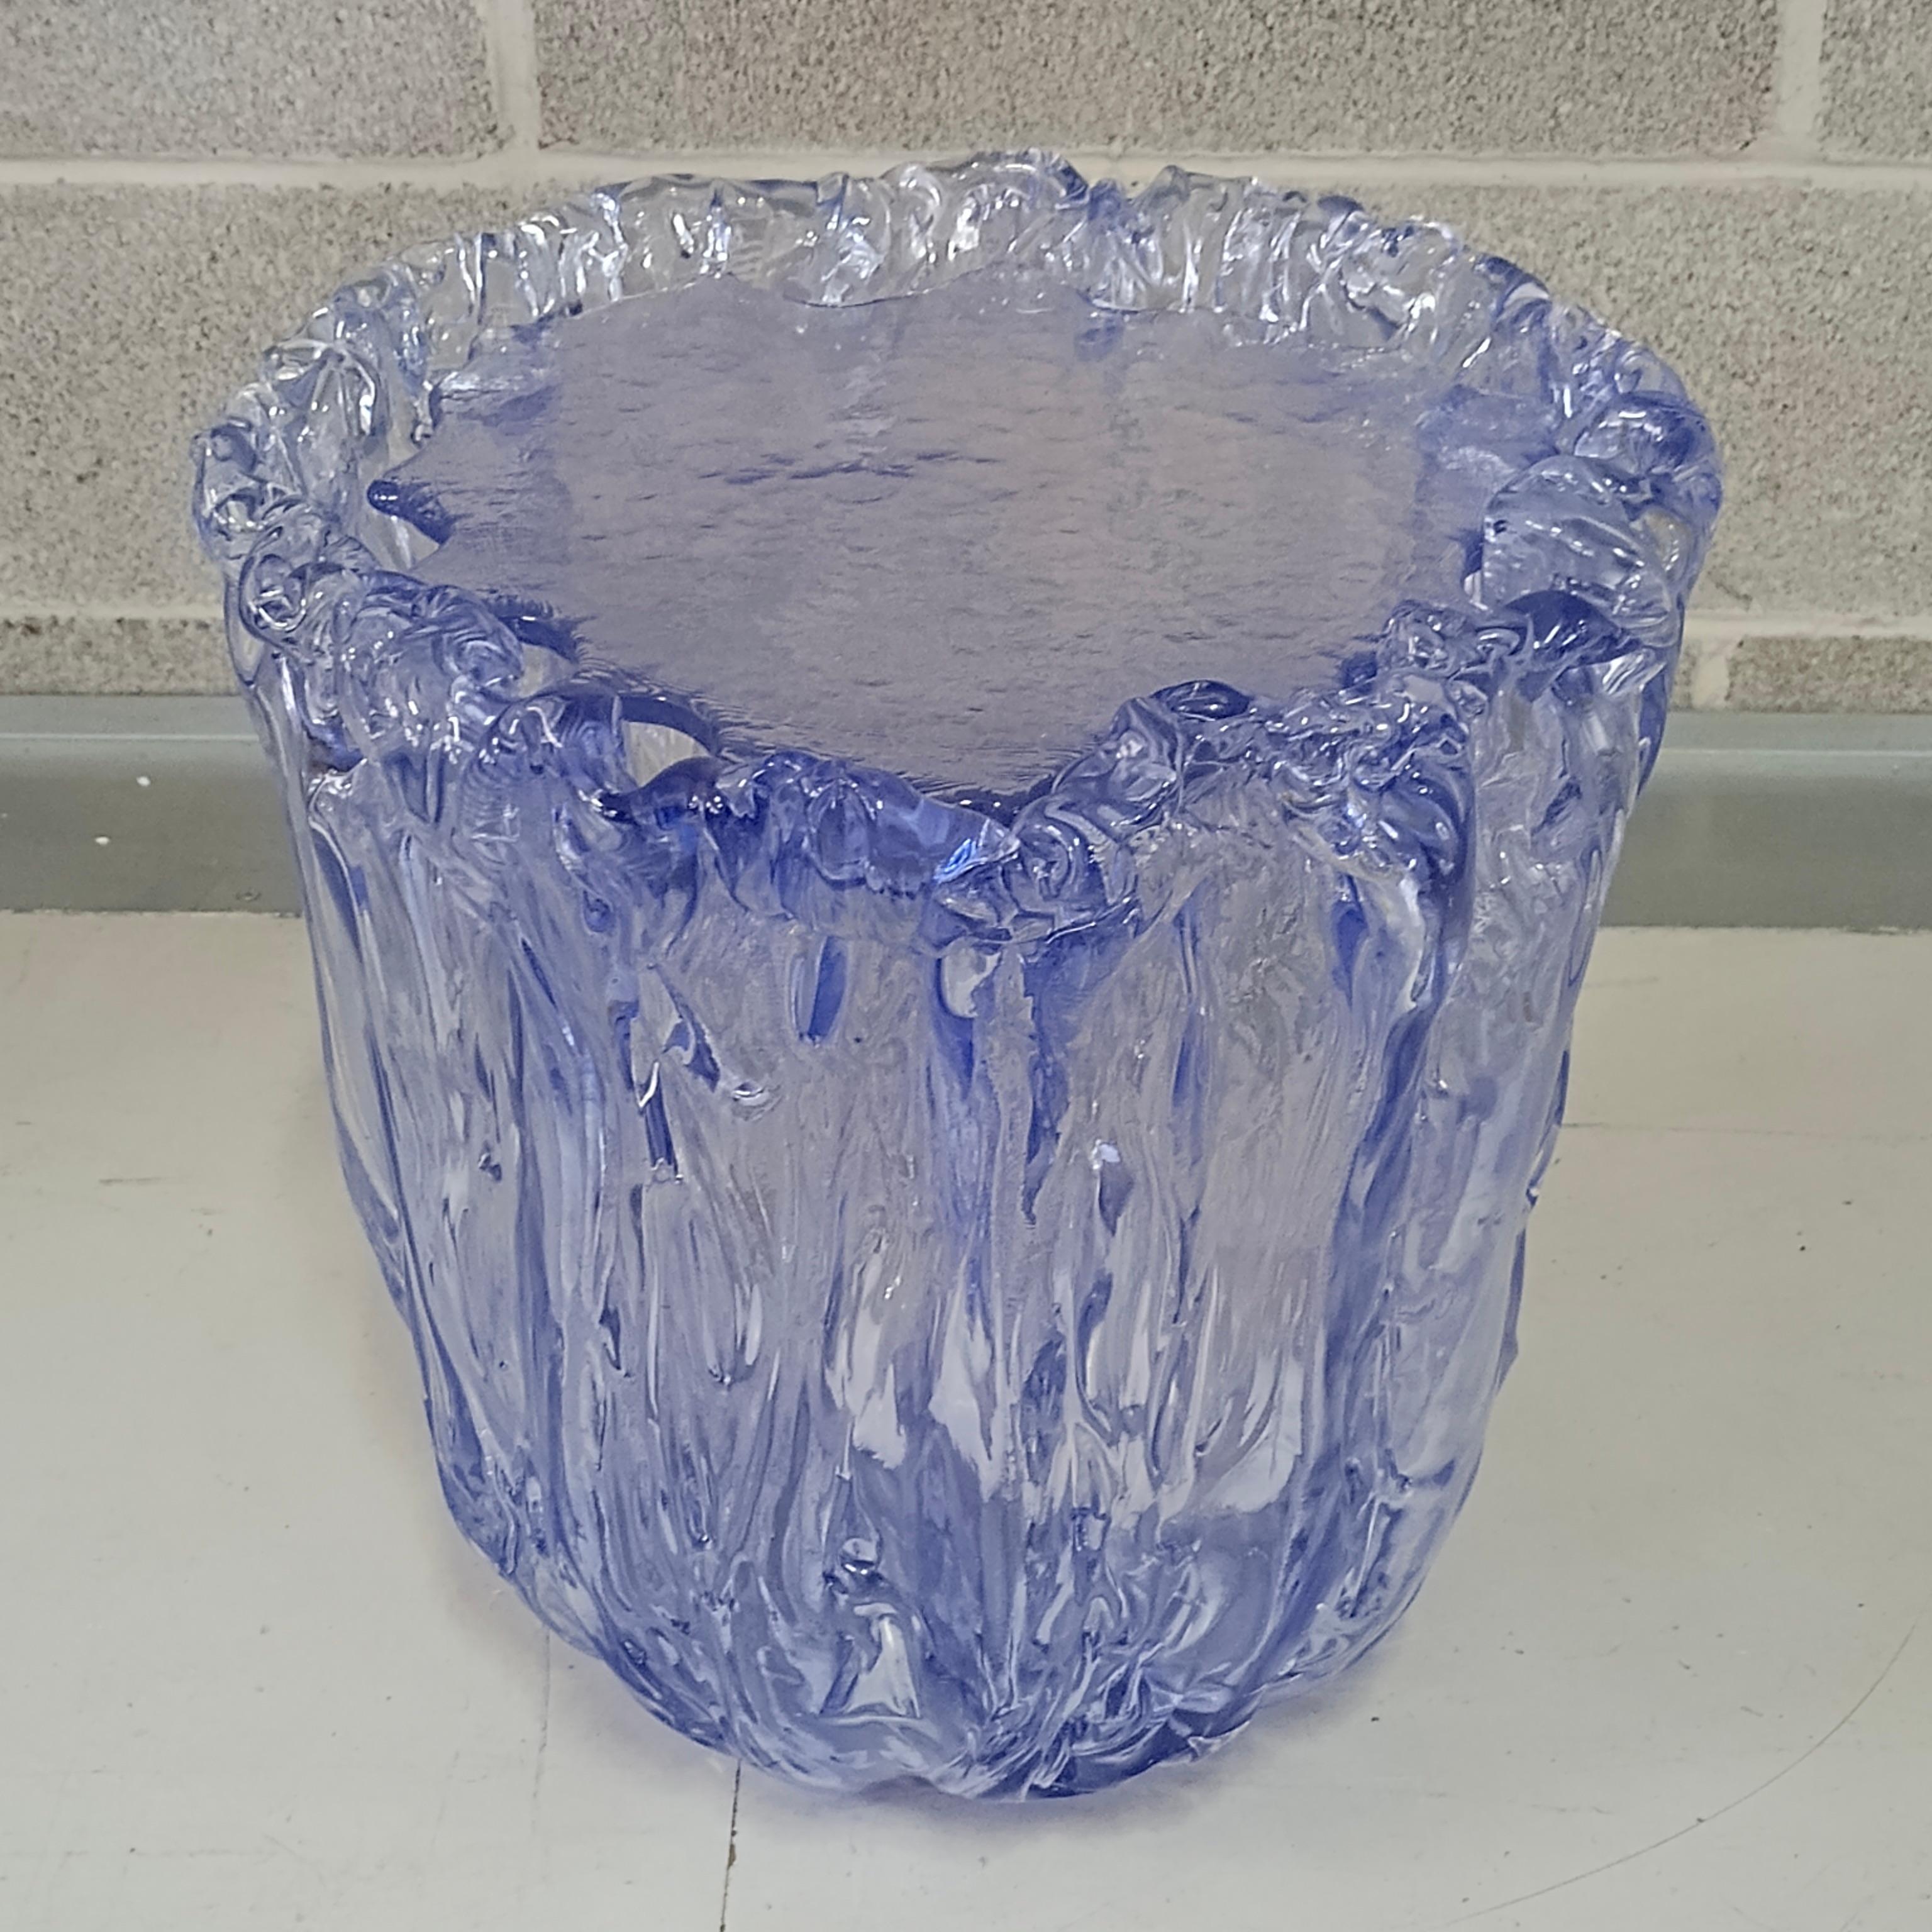 Very particular Murano glass side table with an exciting periwinkle color, with a very original design, a real Murano glass sculpture.

The coffee table is made up of a large vase-shaped base in Murano glass and a disc also in Murano glass, which is